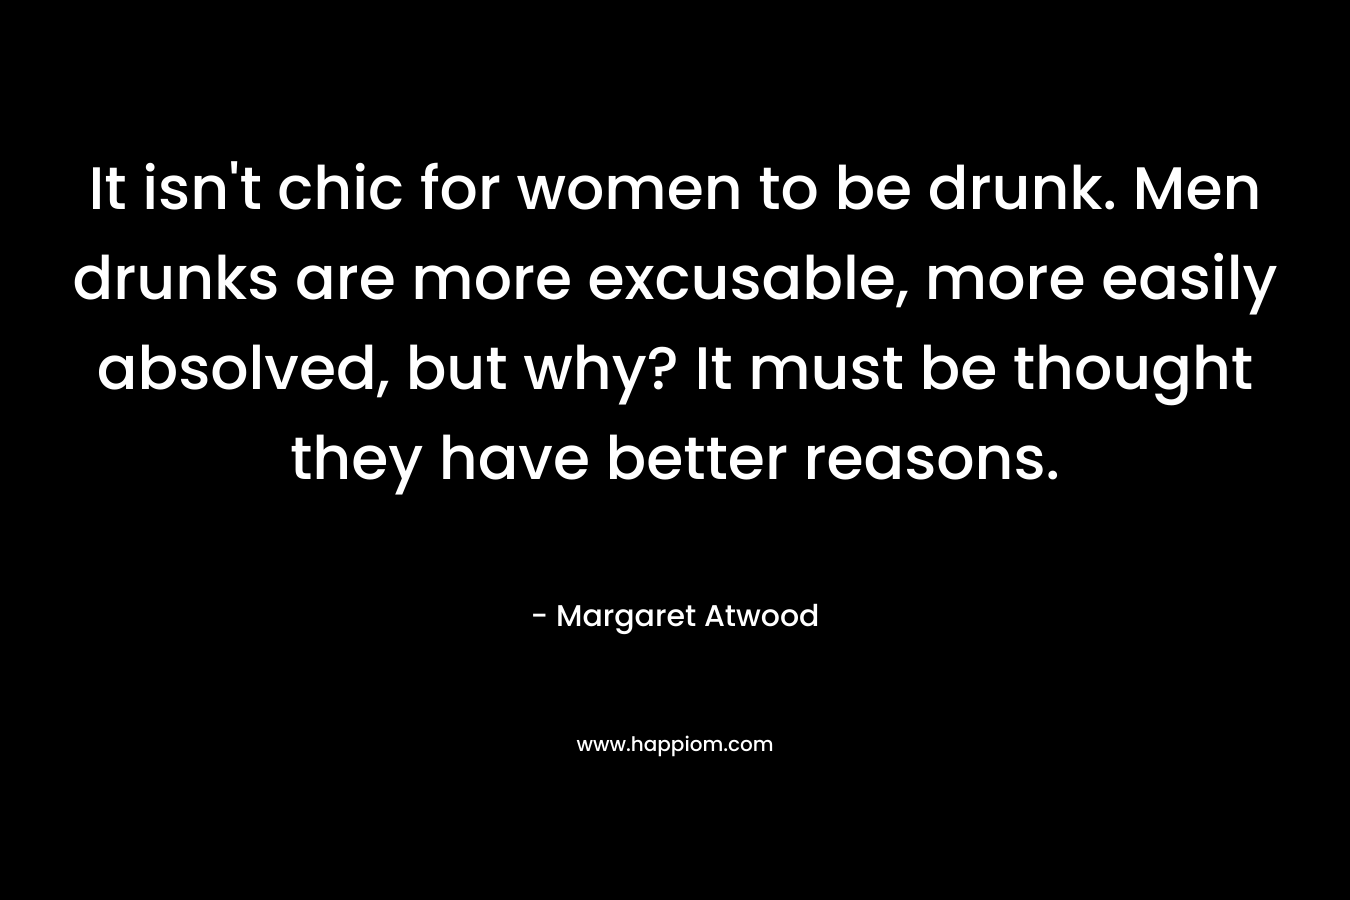 It isn't chic for women to be drunk. Men drunks are more excusable, more easily absolved, but why? It must be thought they have better reasons.